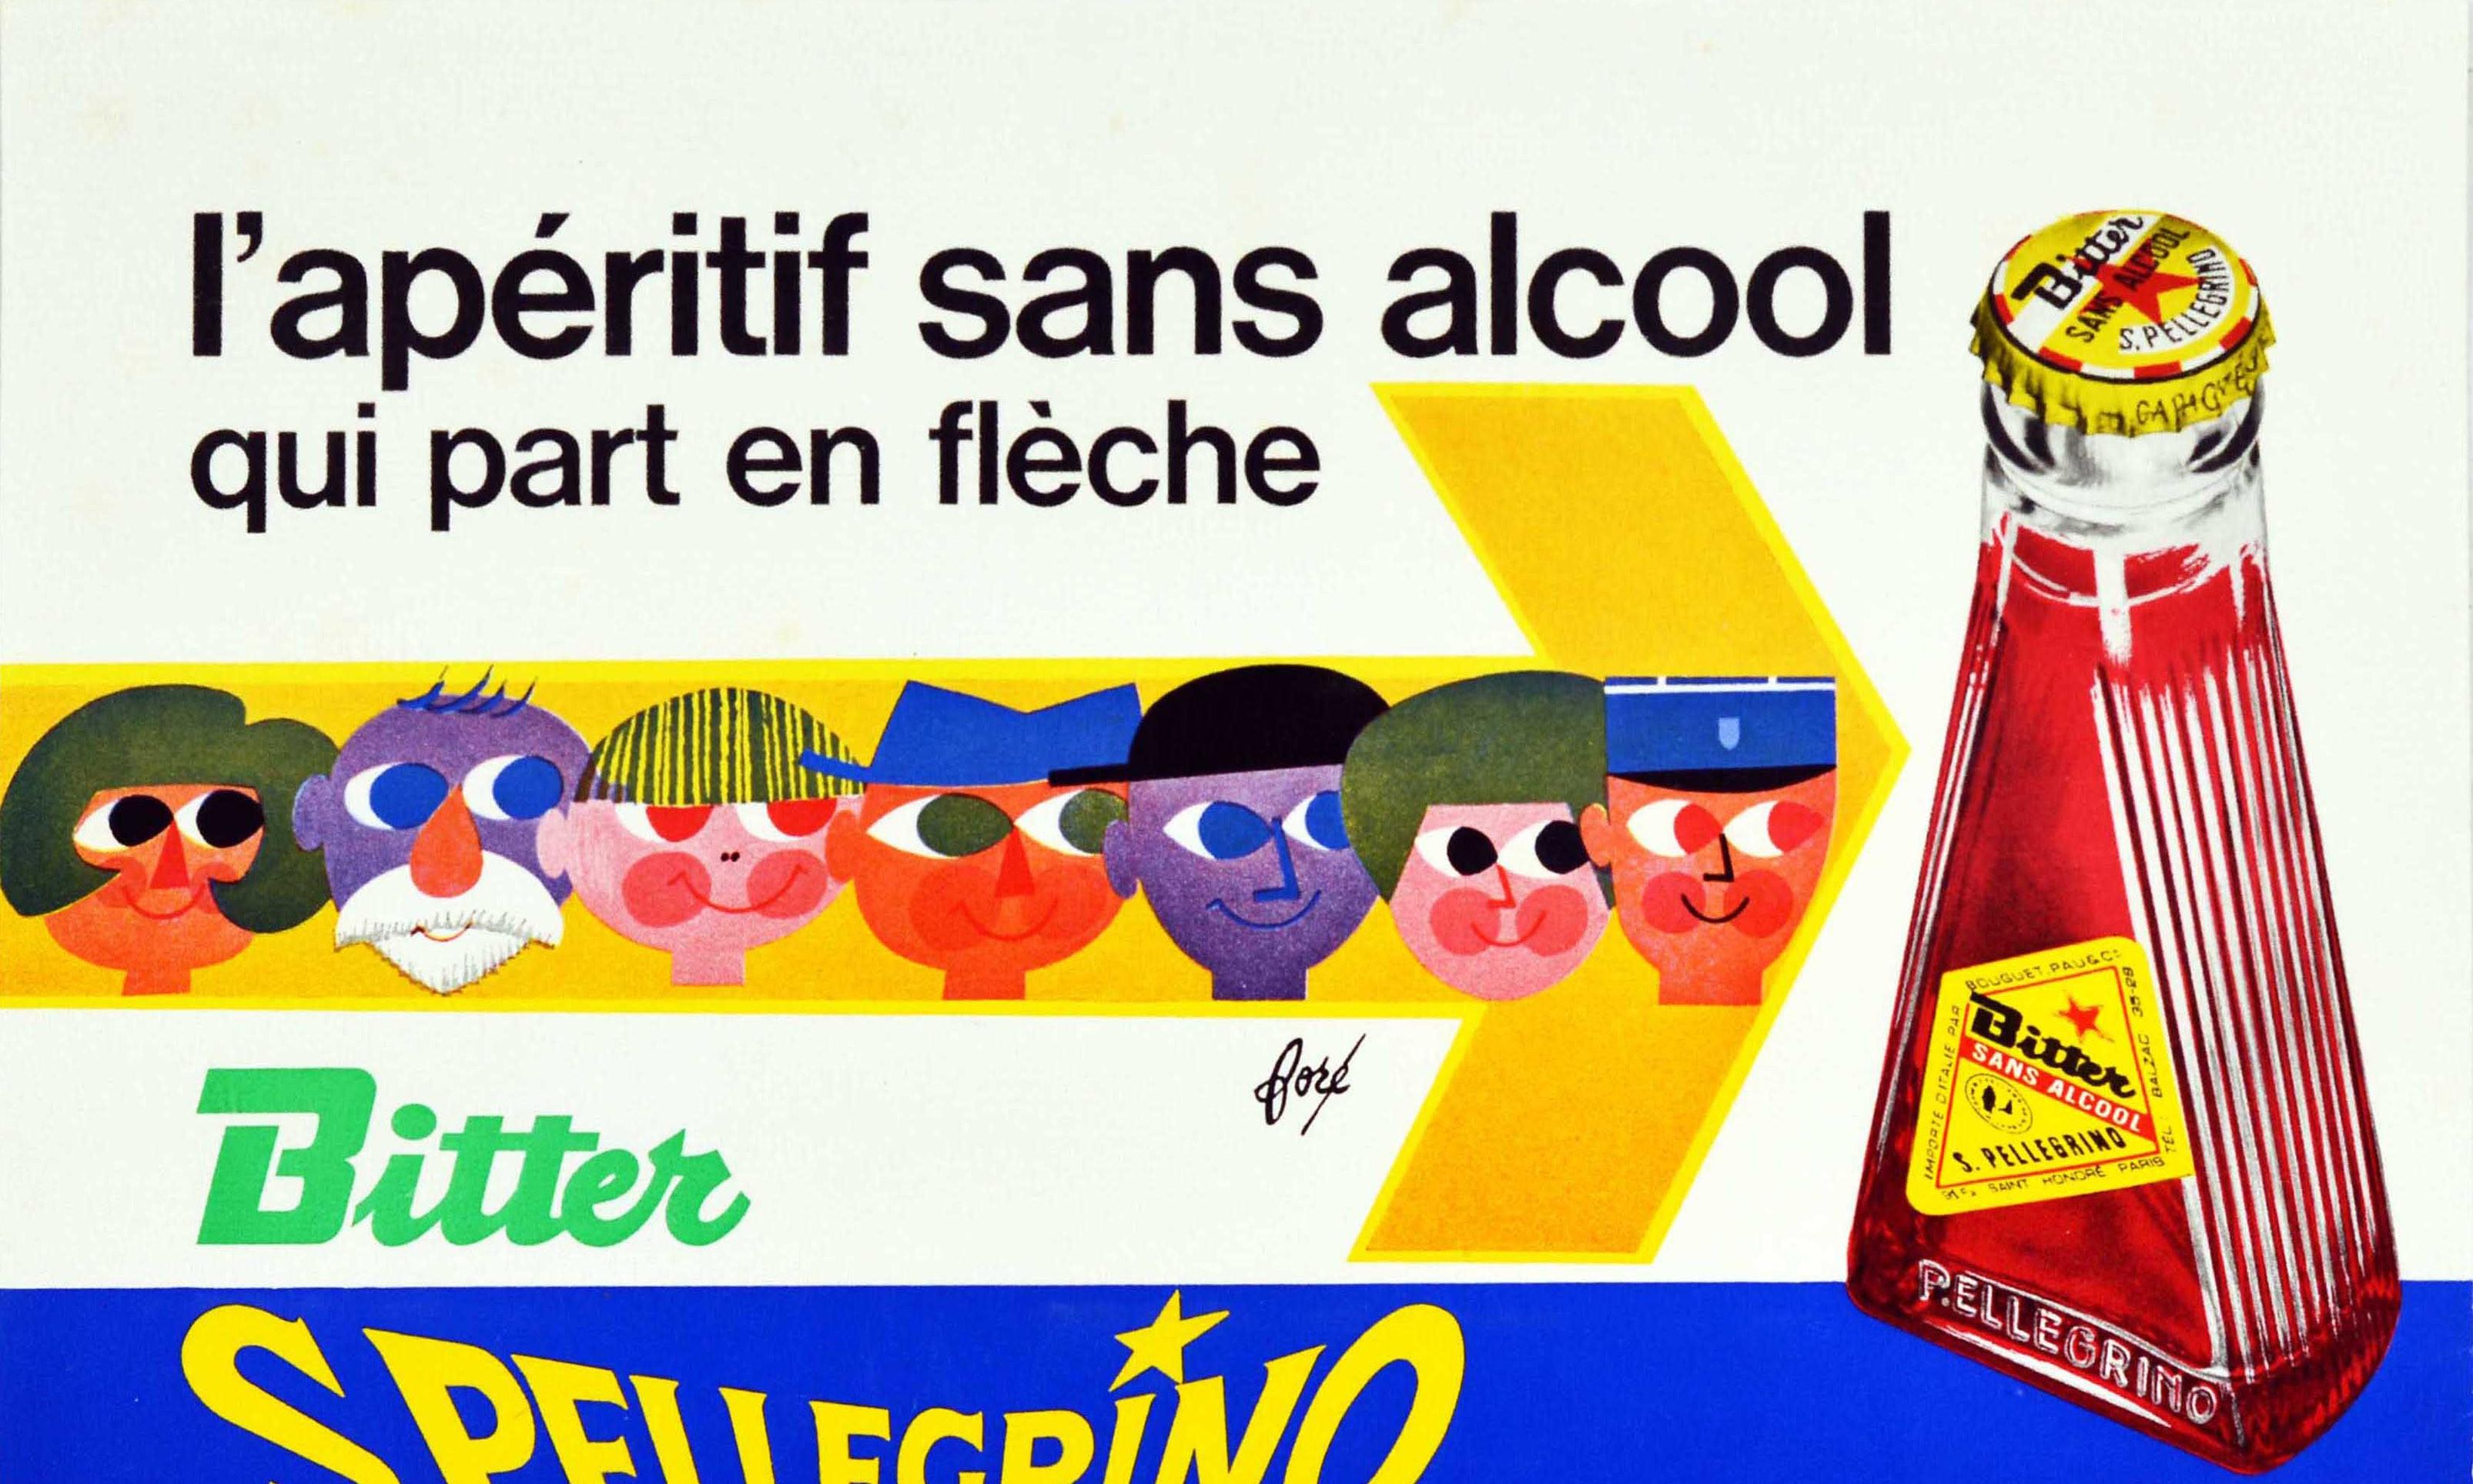 Original vintage drink advertising poster for San Pellegrino Bitter the alcohol free aperitif - l'aperitif sans alcool qui part en fleche - featuring an image of colourful cartoon style faces on a yellow arrow pointing at the iconic drink bottle